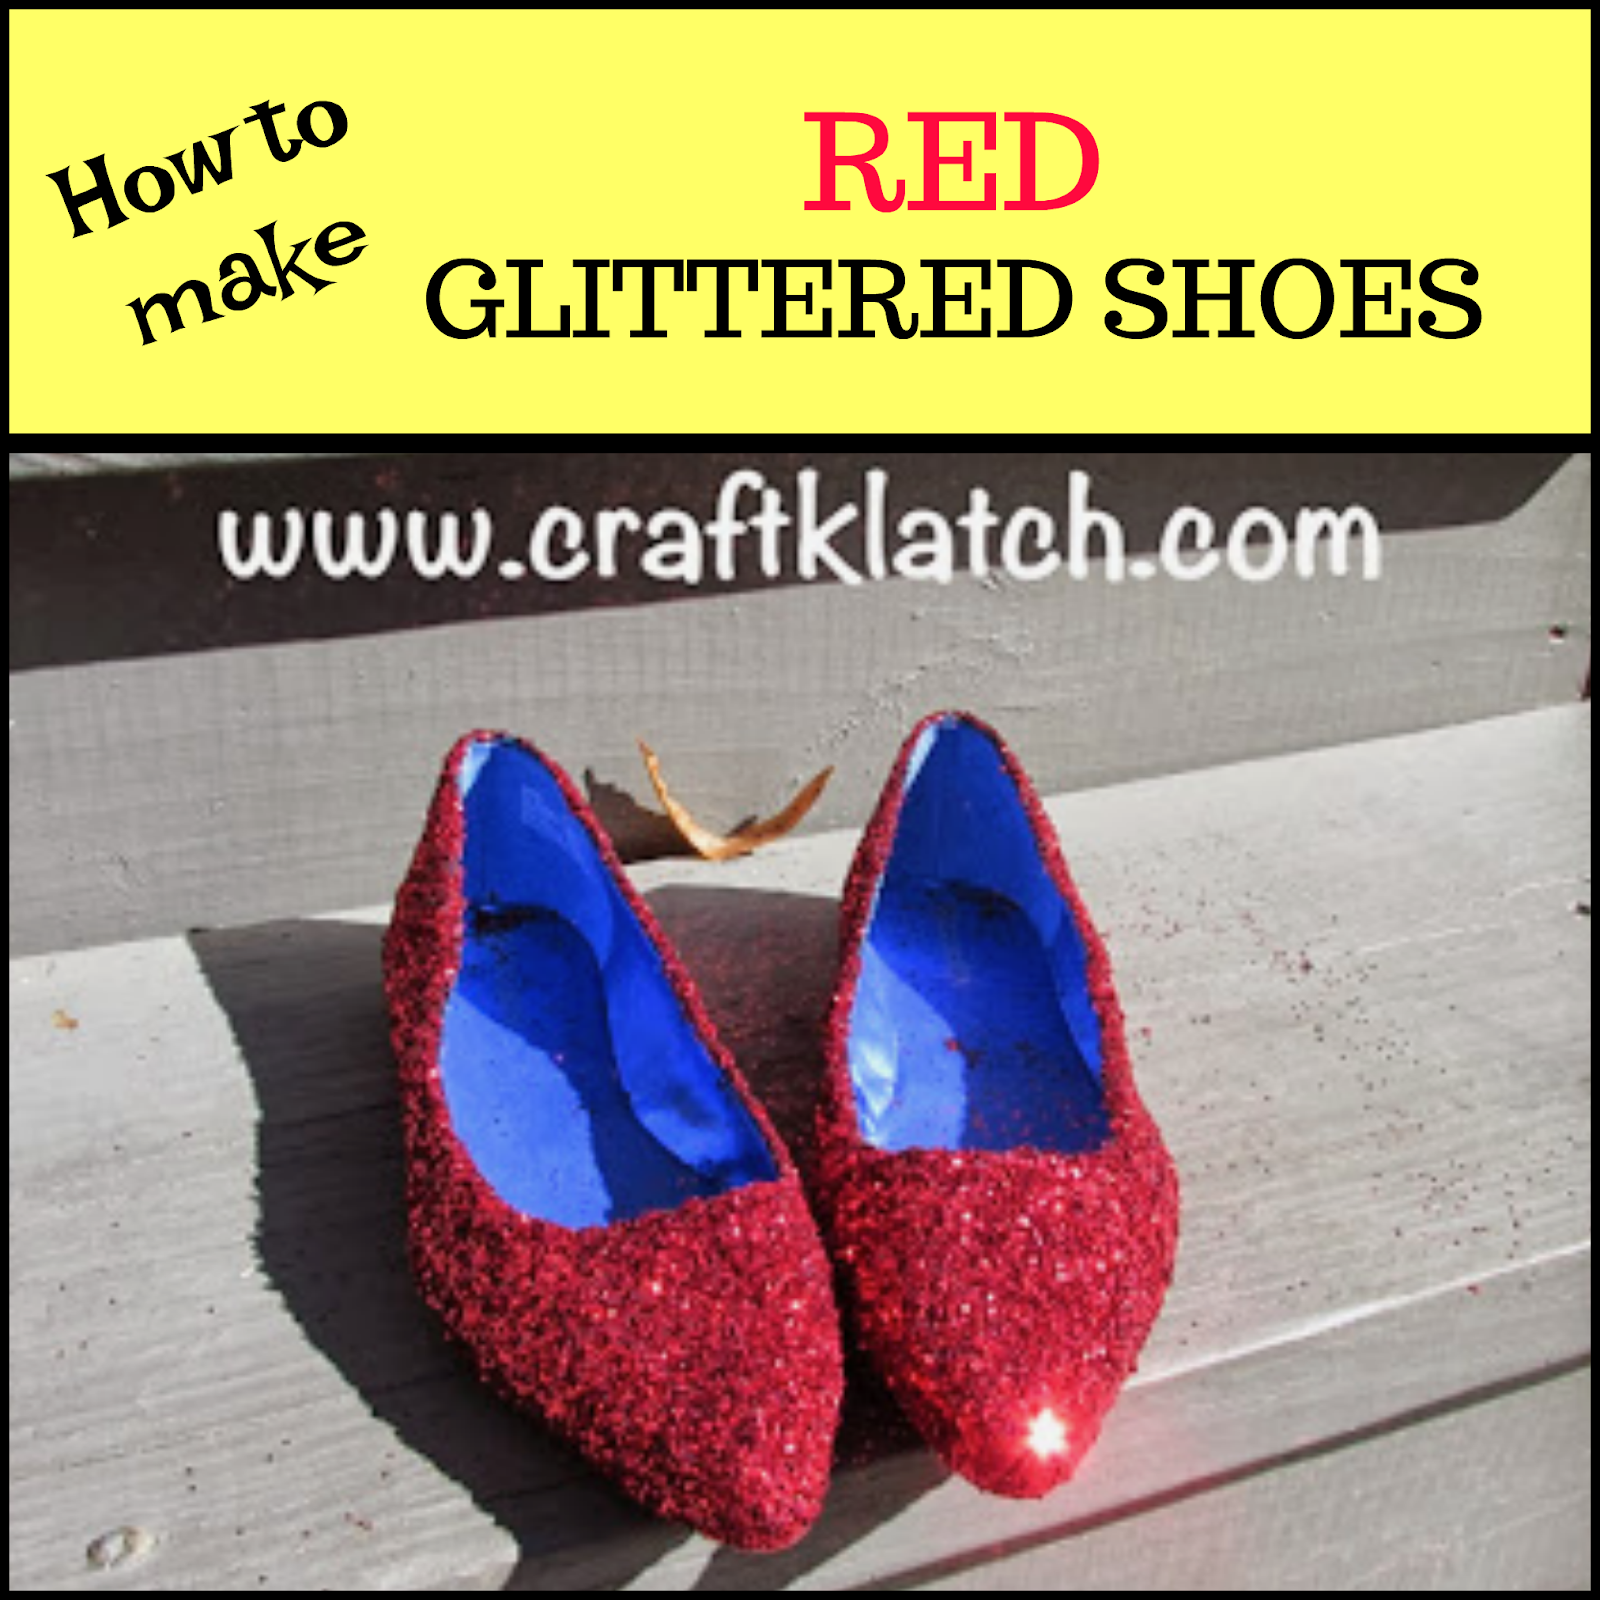 Red Glittered Shoes for Halloween - Craft Klatch